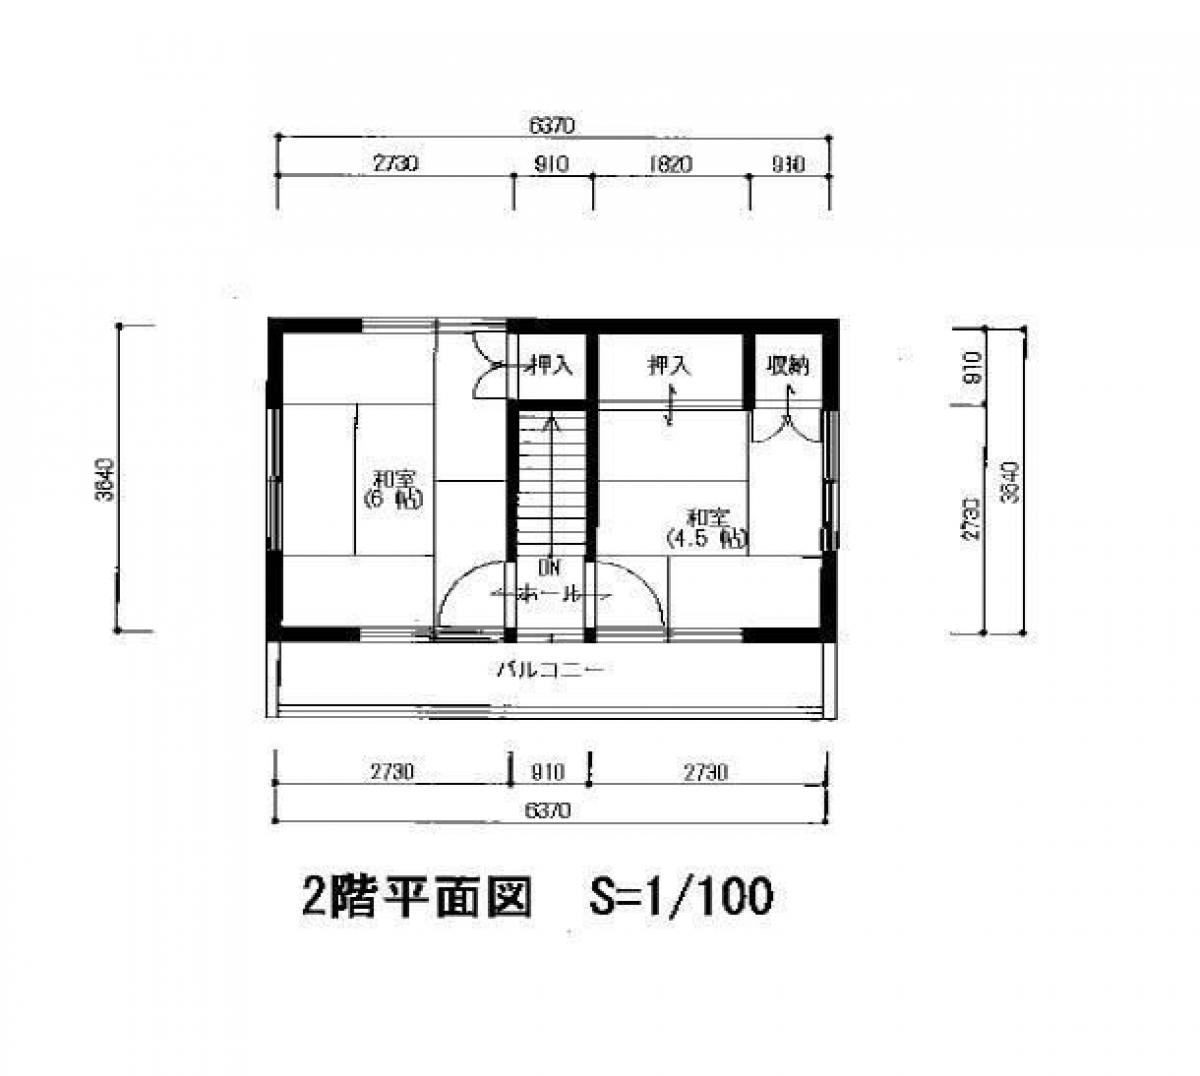 Picture of Home For Sale in Shiogama Shi, Miyagi, Japan